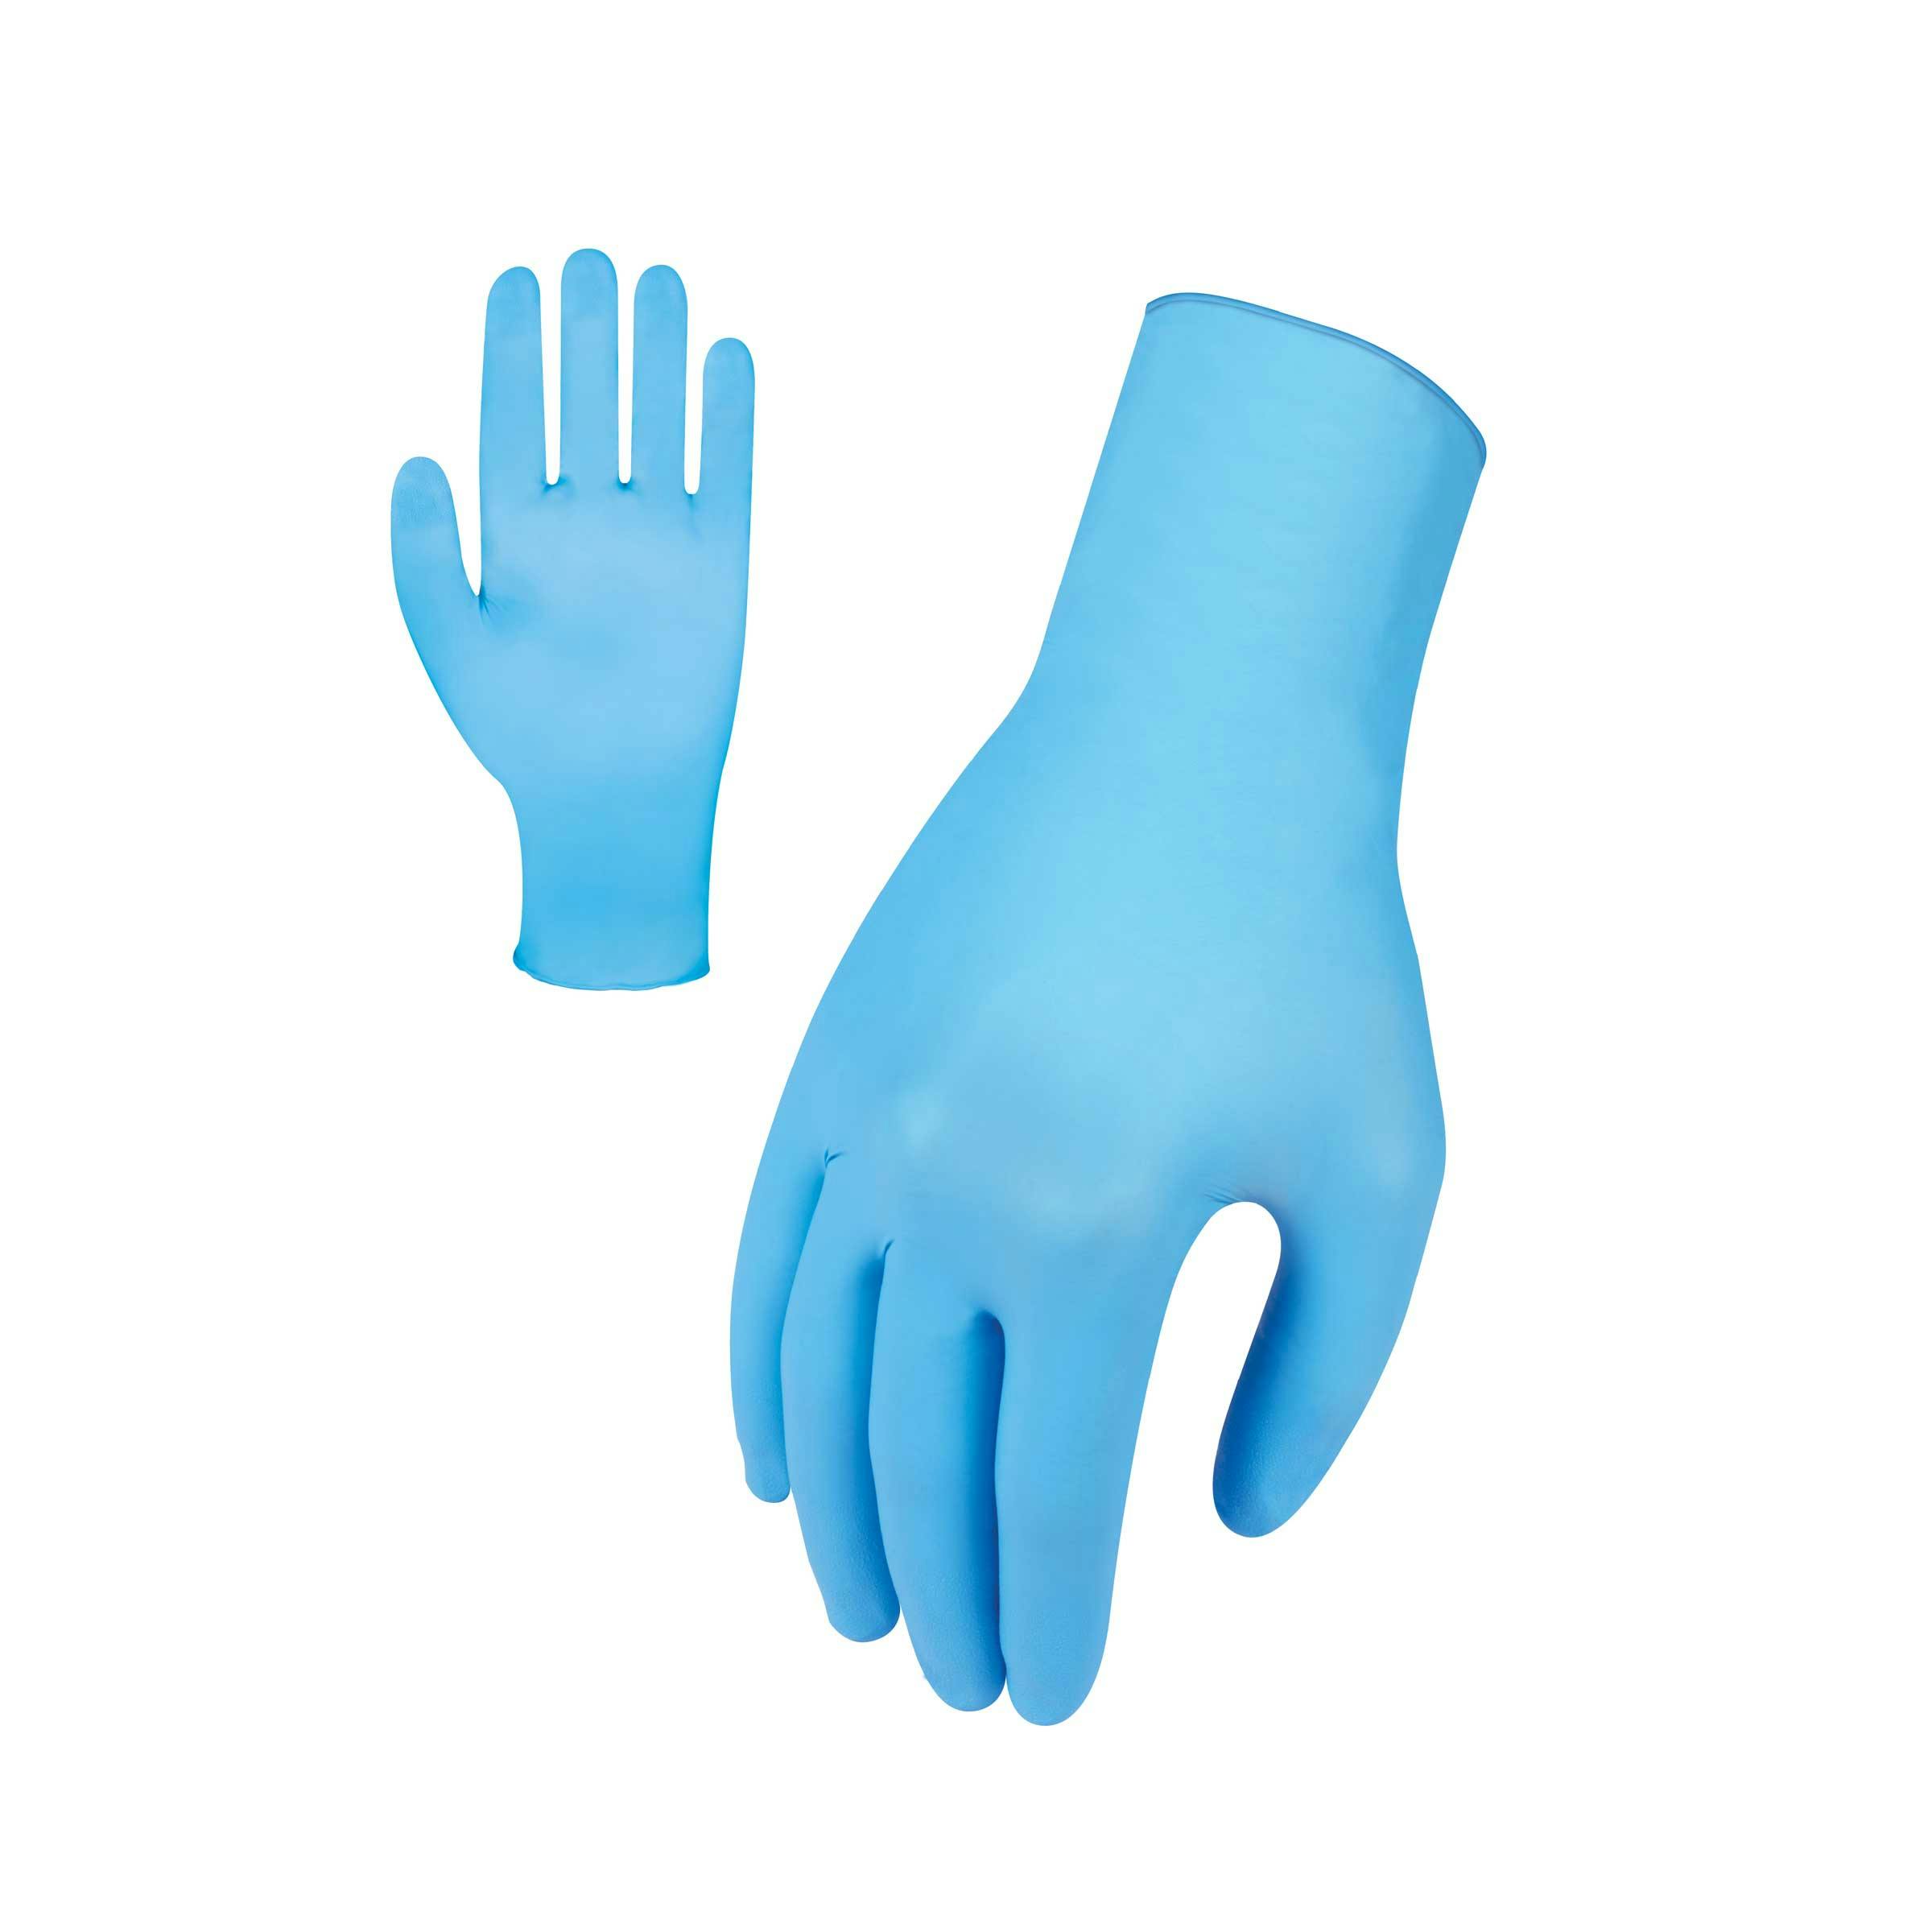 Force360 Safetouch Food & Medical Disposable Nitrile Glove 100/Box (Blue)